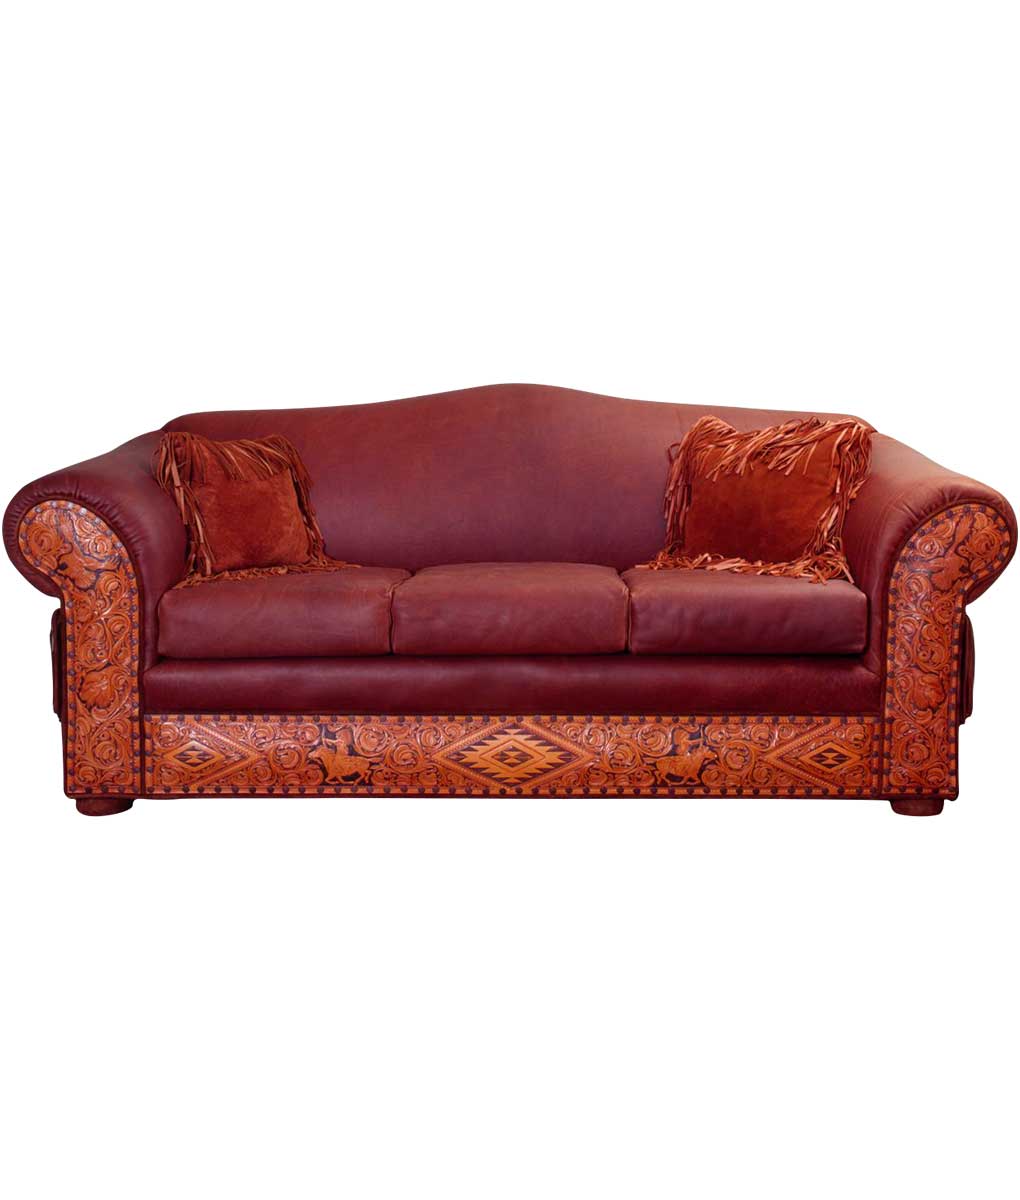 Hand Tooled Leather Sofa Elegant, Rustic Leather Couch